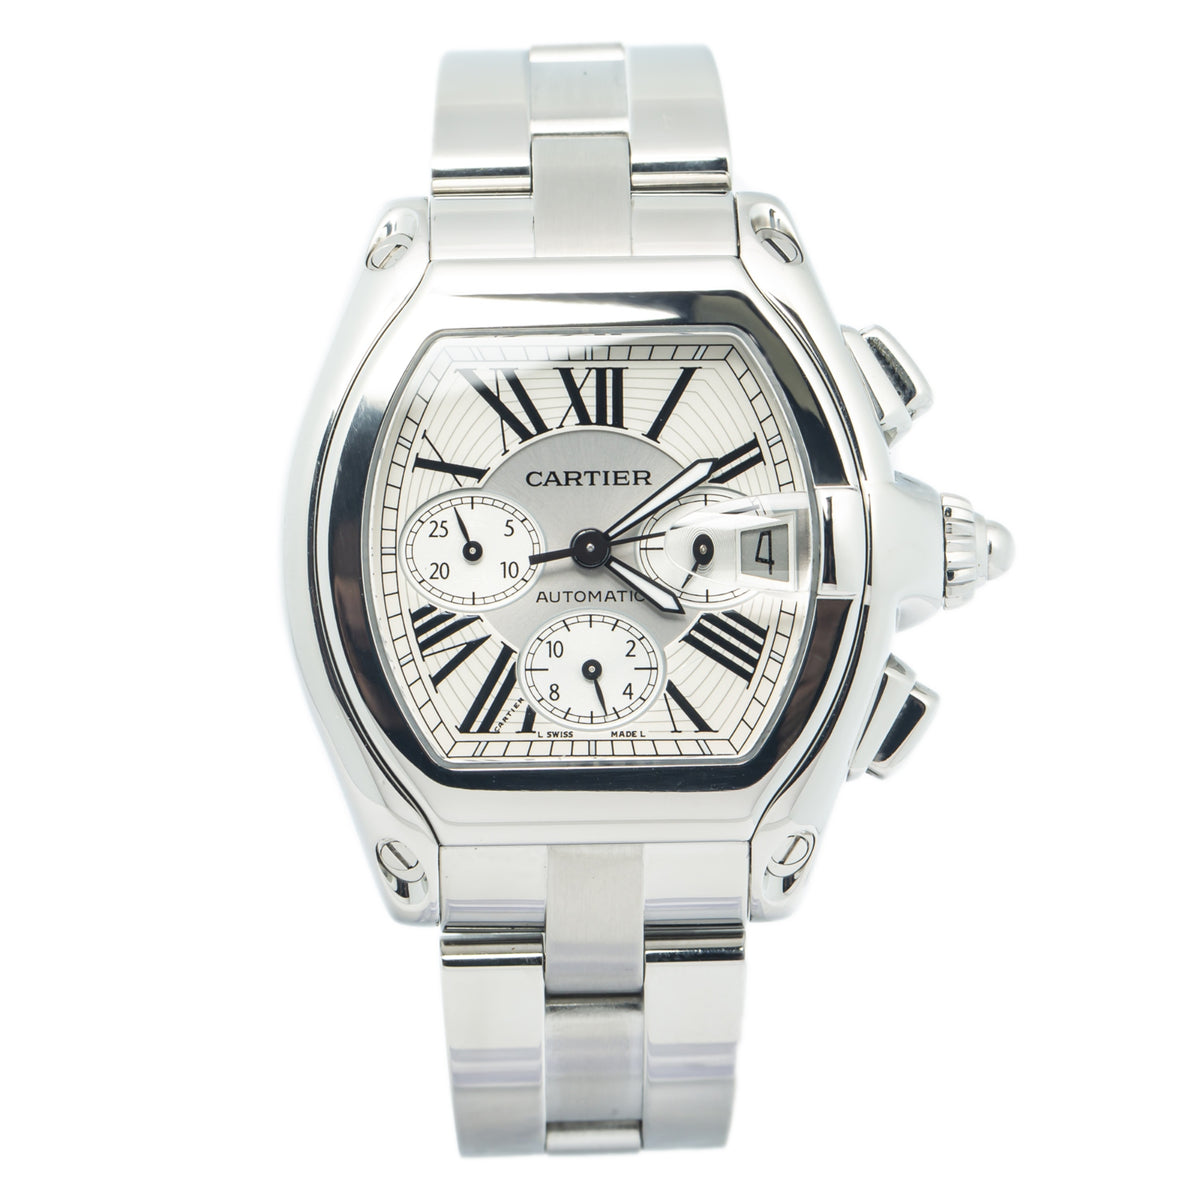 Cartier Roadster 2618 W62019X6 Stainless Steel Chrono Date Automatic Watch 43mm